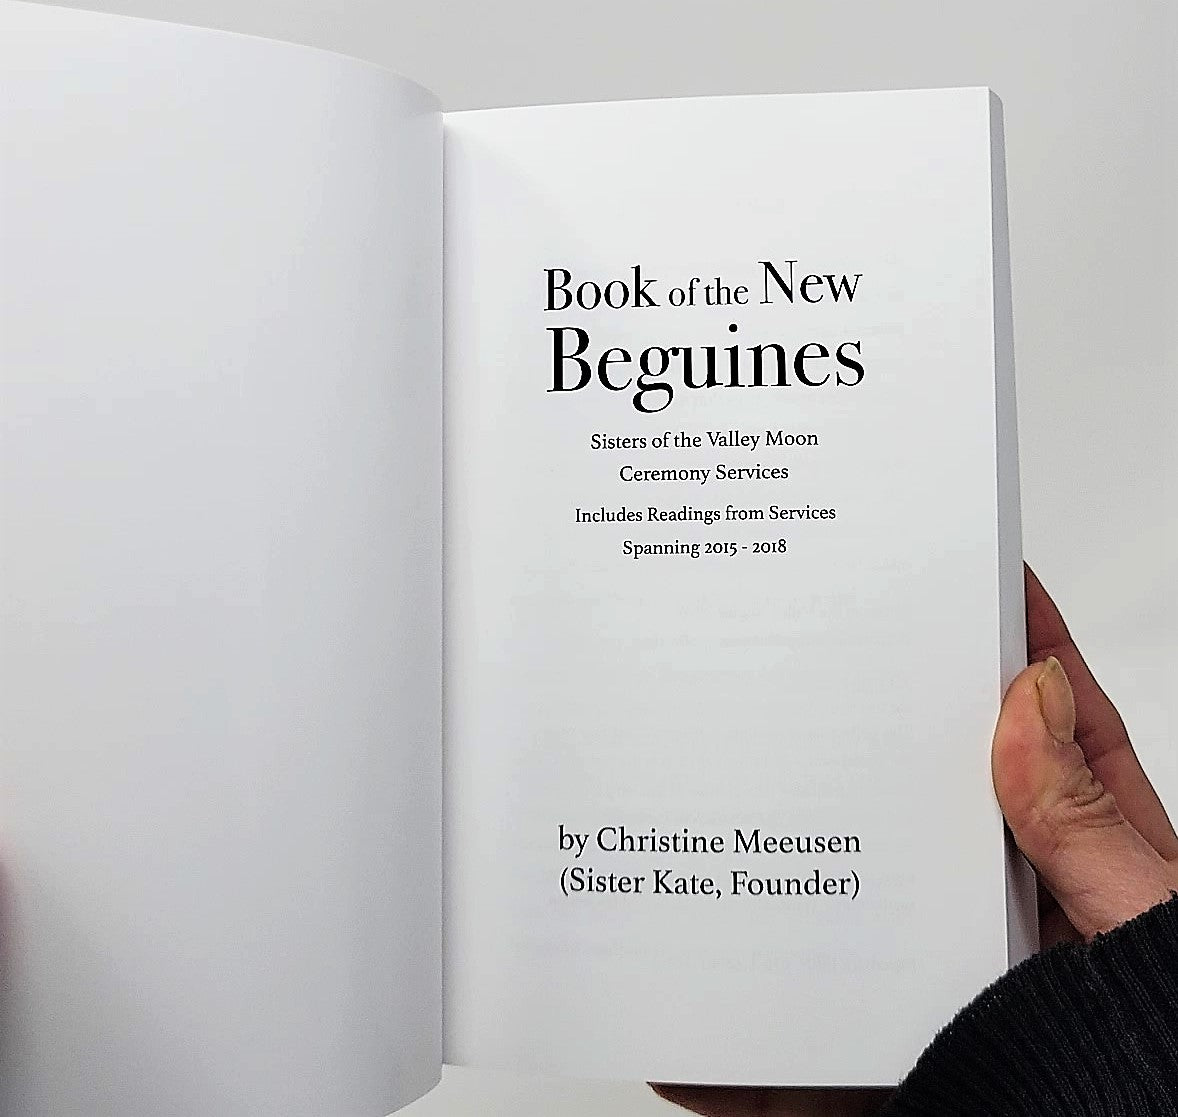 The Book of the New Beguines